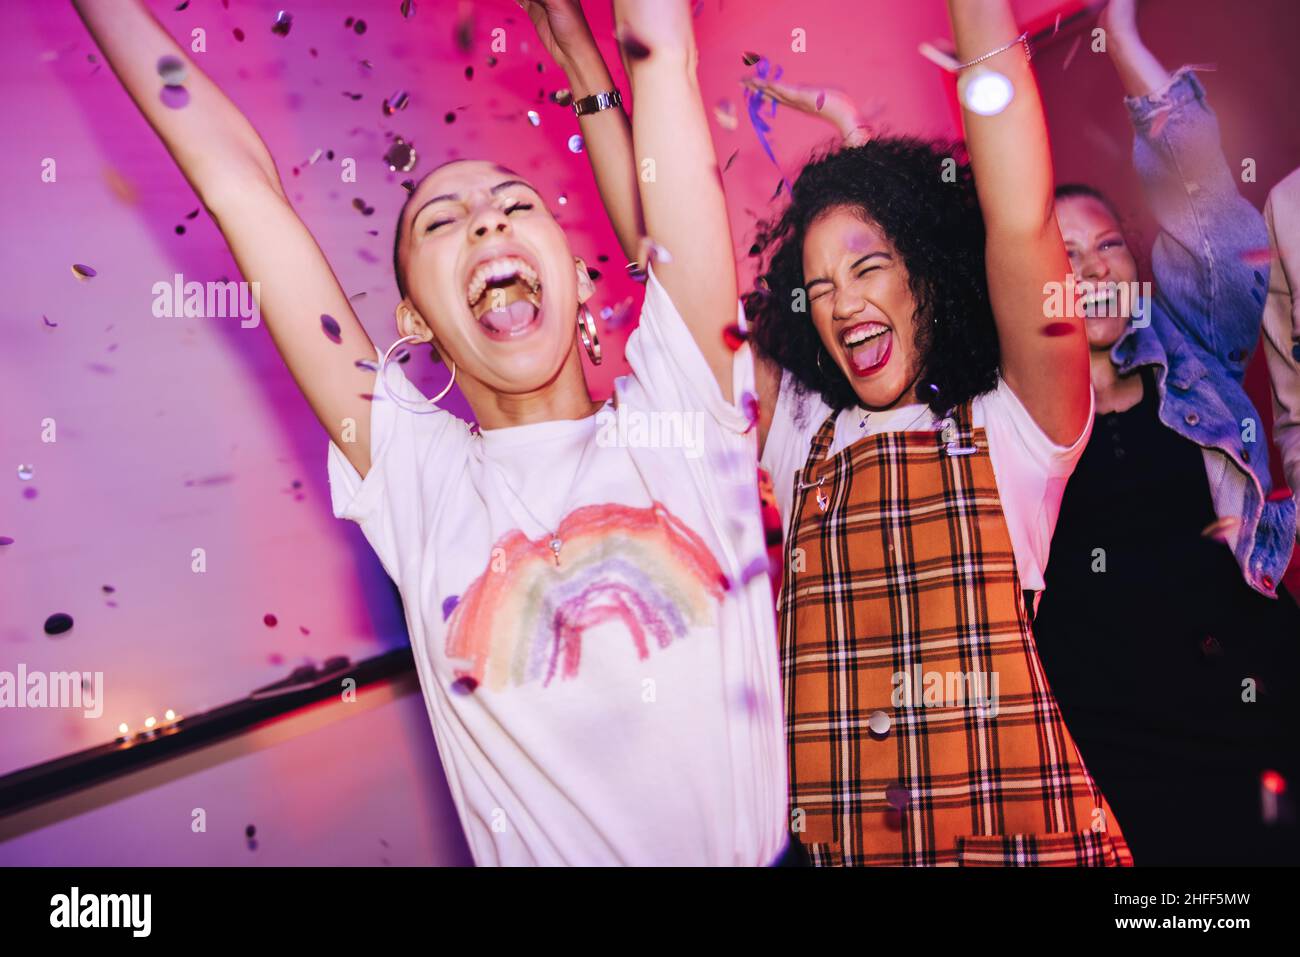 Friends cheering happily at a house party. Cheerful female friends shouting for joy while standing under falling confetti. Group of vibrant young wome Stock Photo